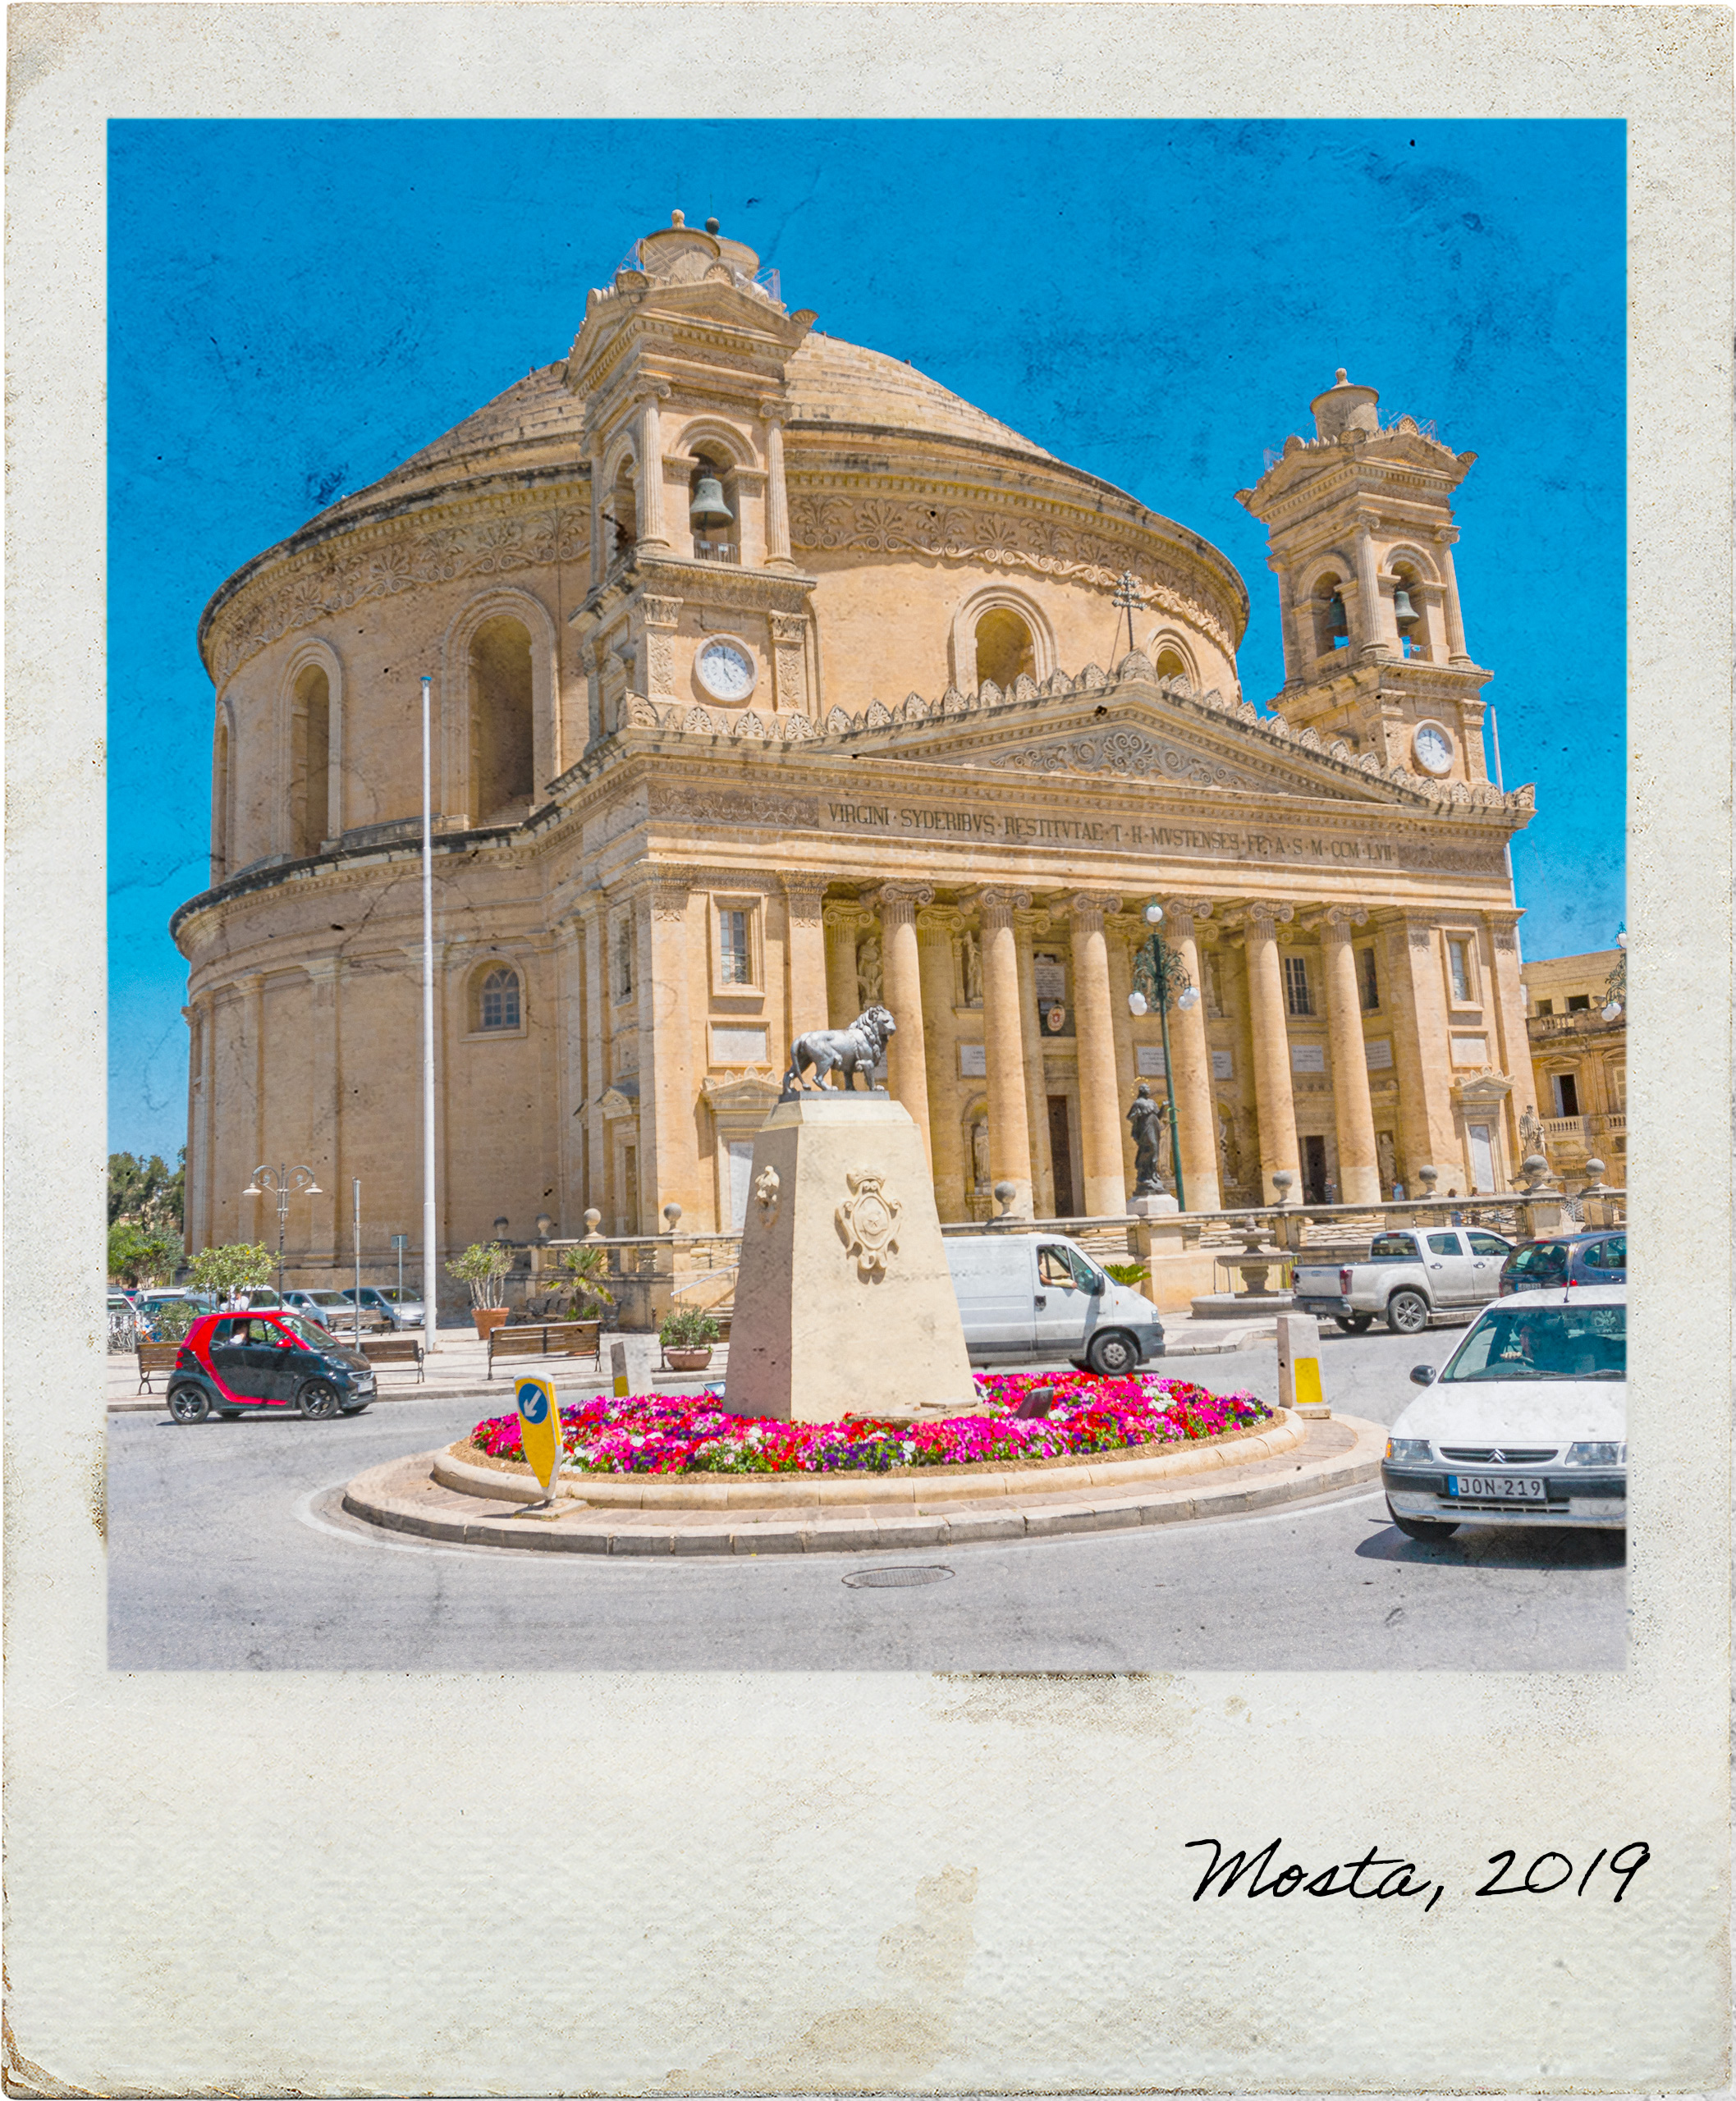 Frontal view of the Rotunda of Mosta